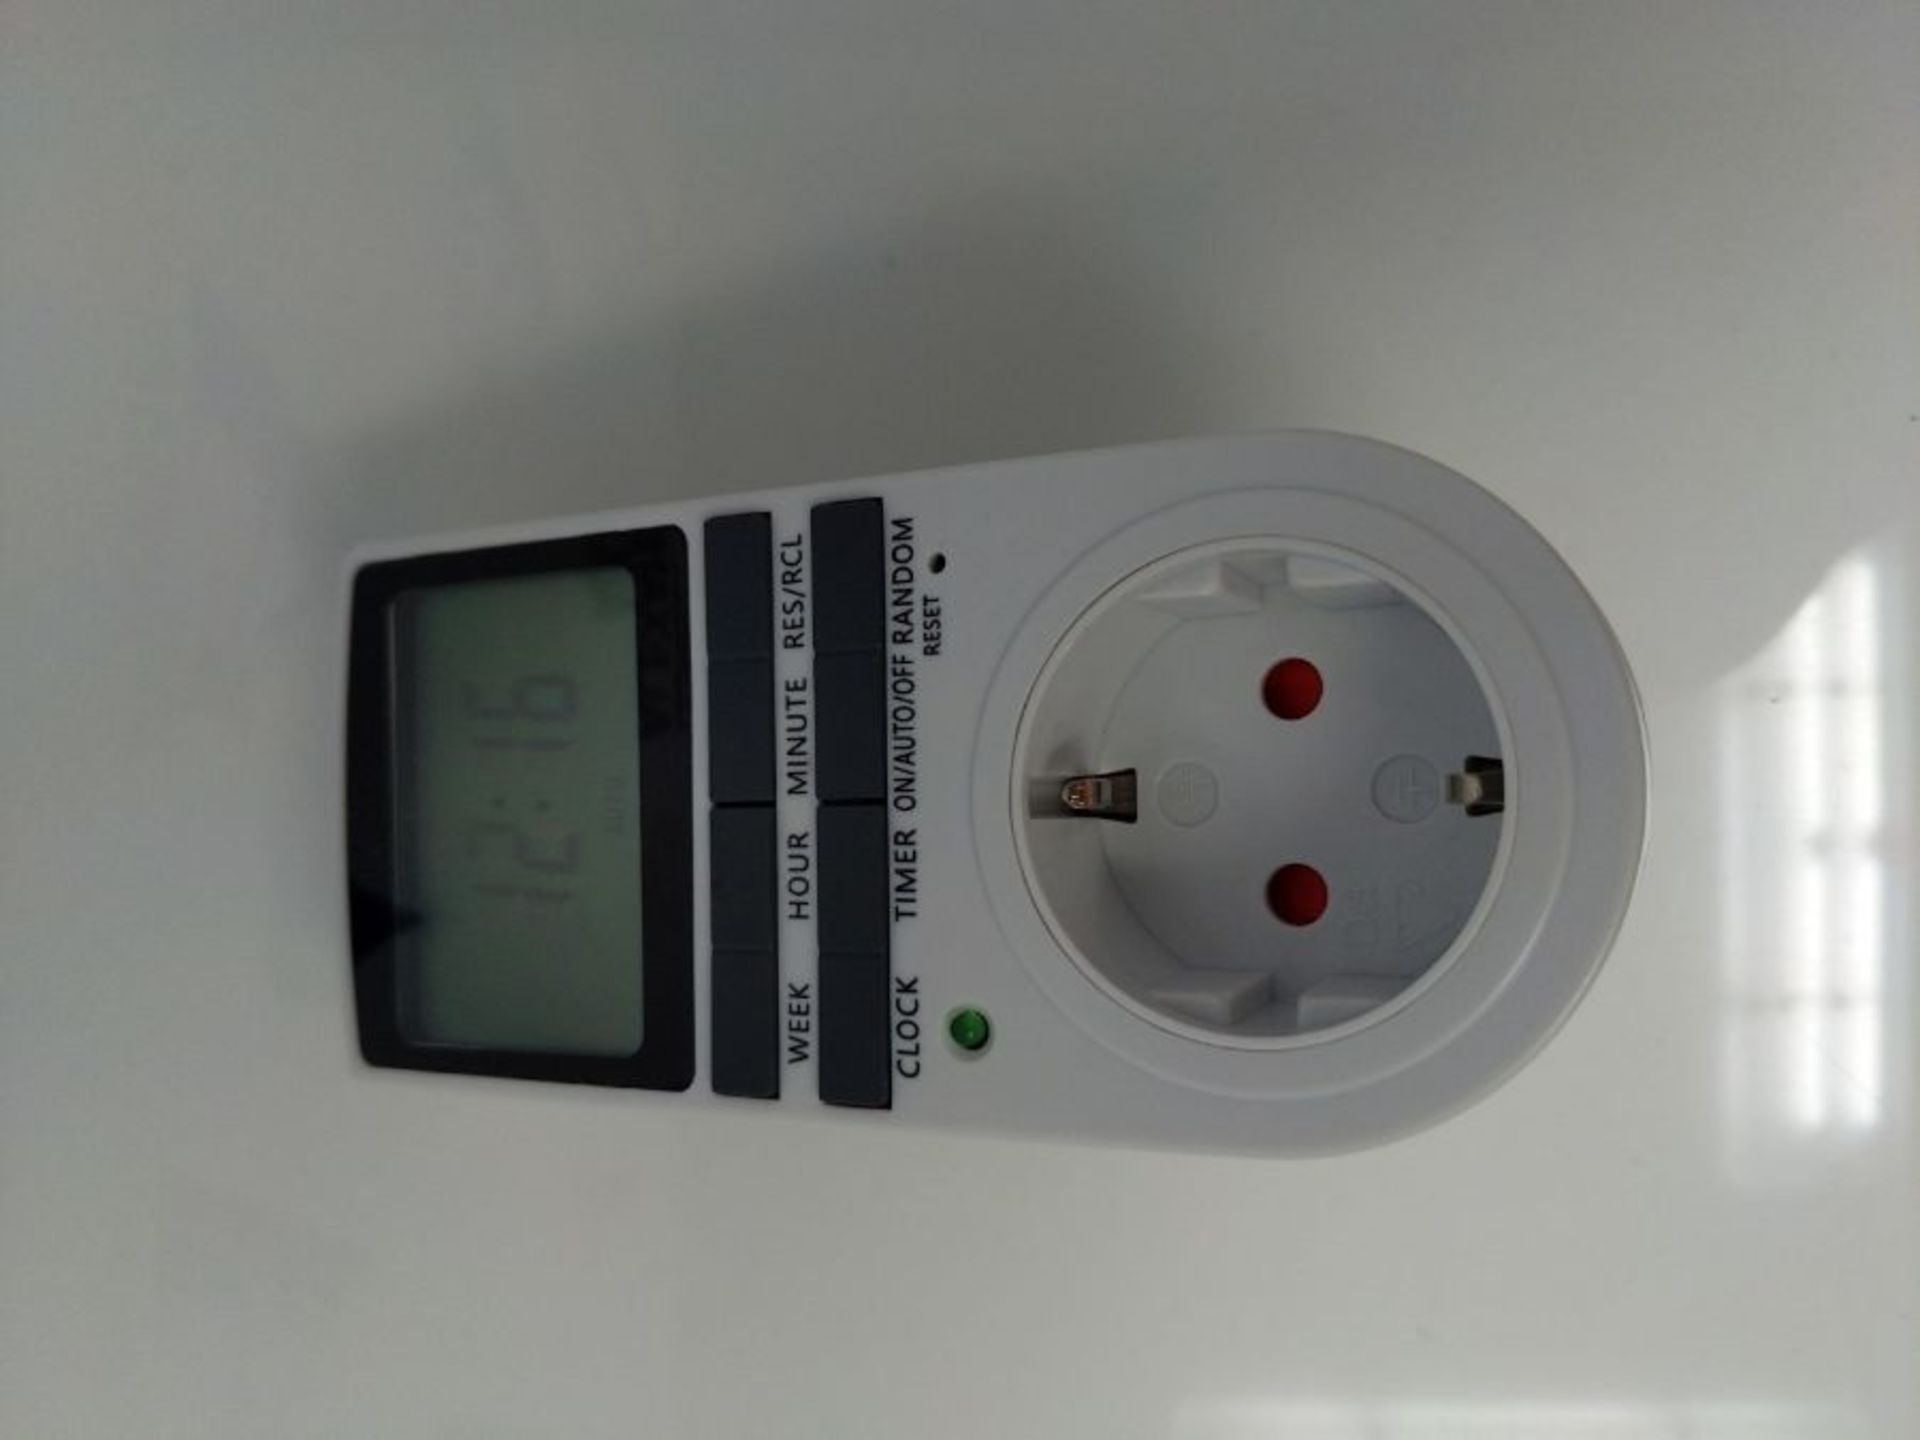 Csl-Computer Digital Timer With 2.1 Inch Lcd Display, 10 Configurable Programs, Backup - Image 3 of 3